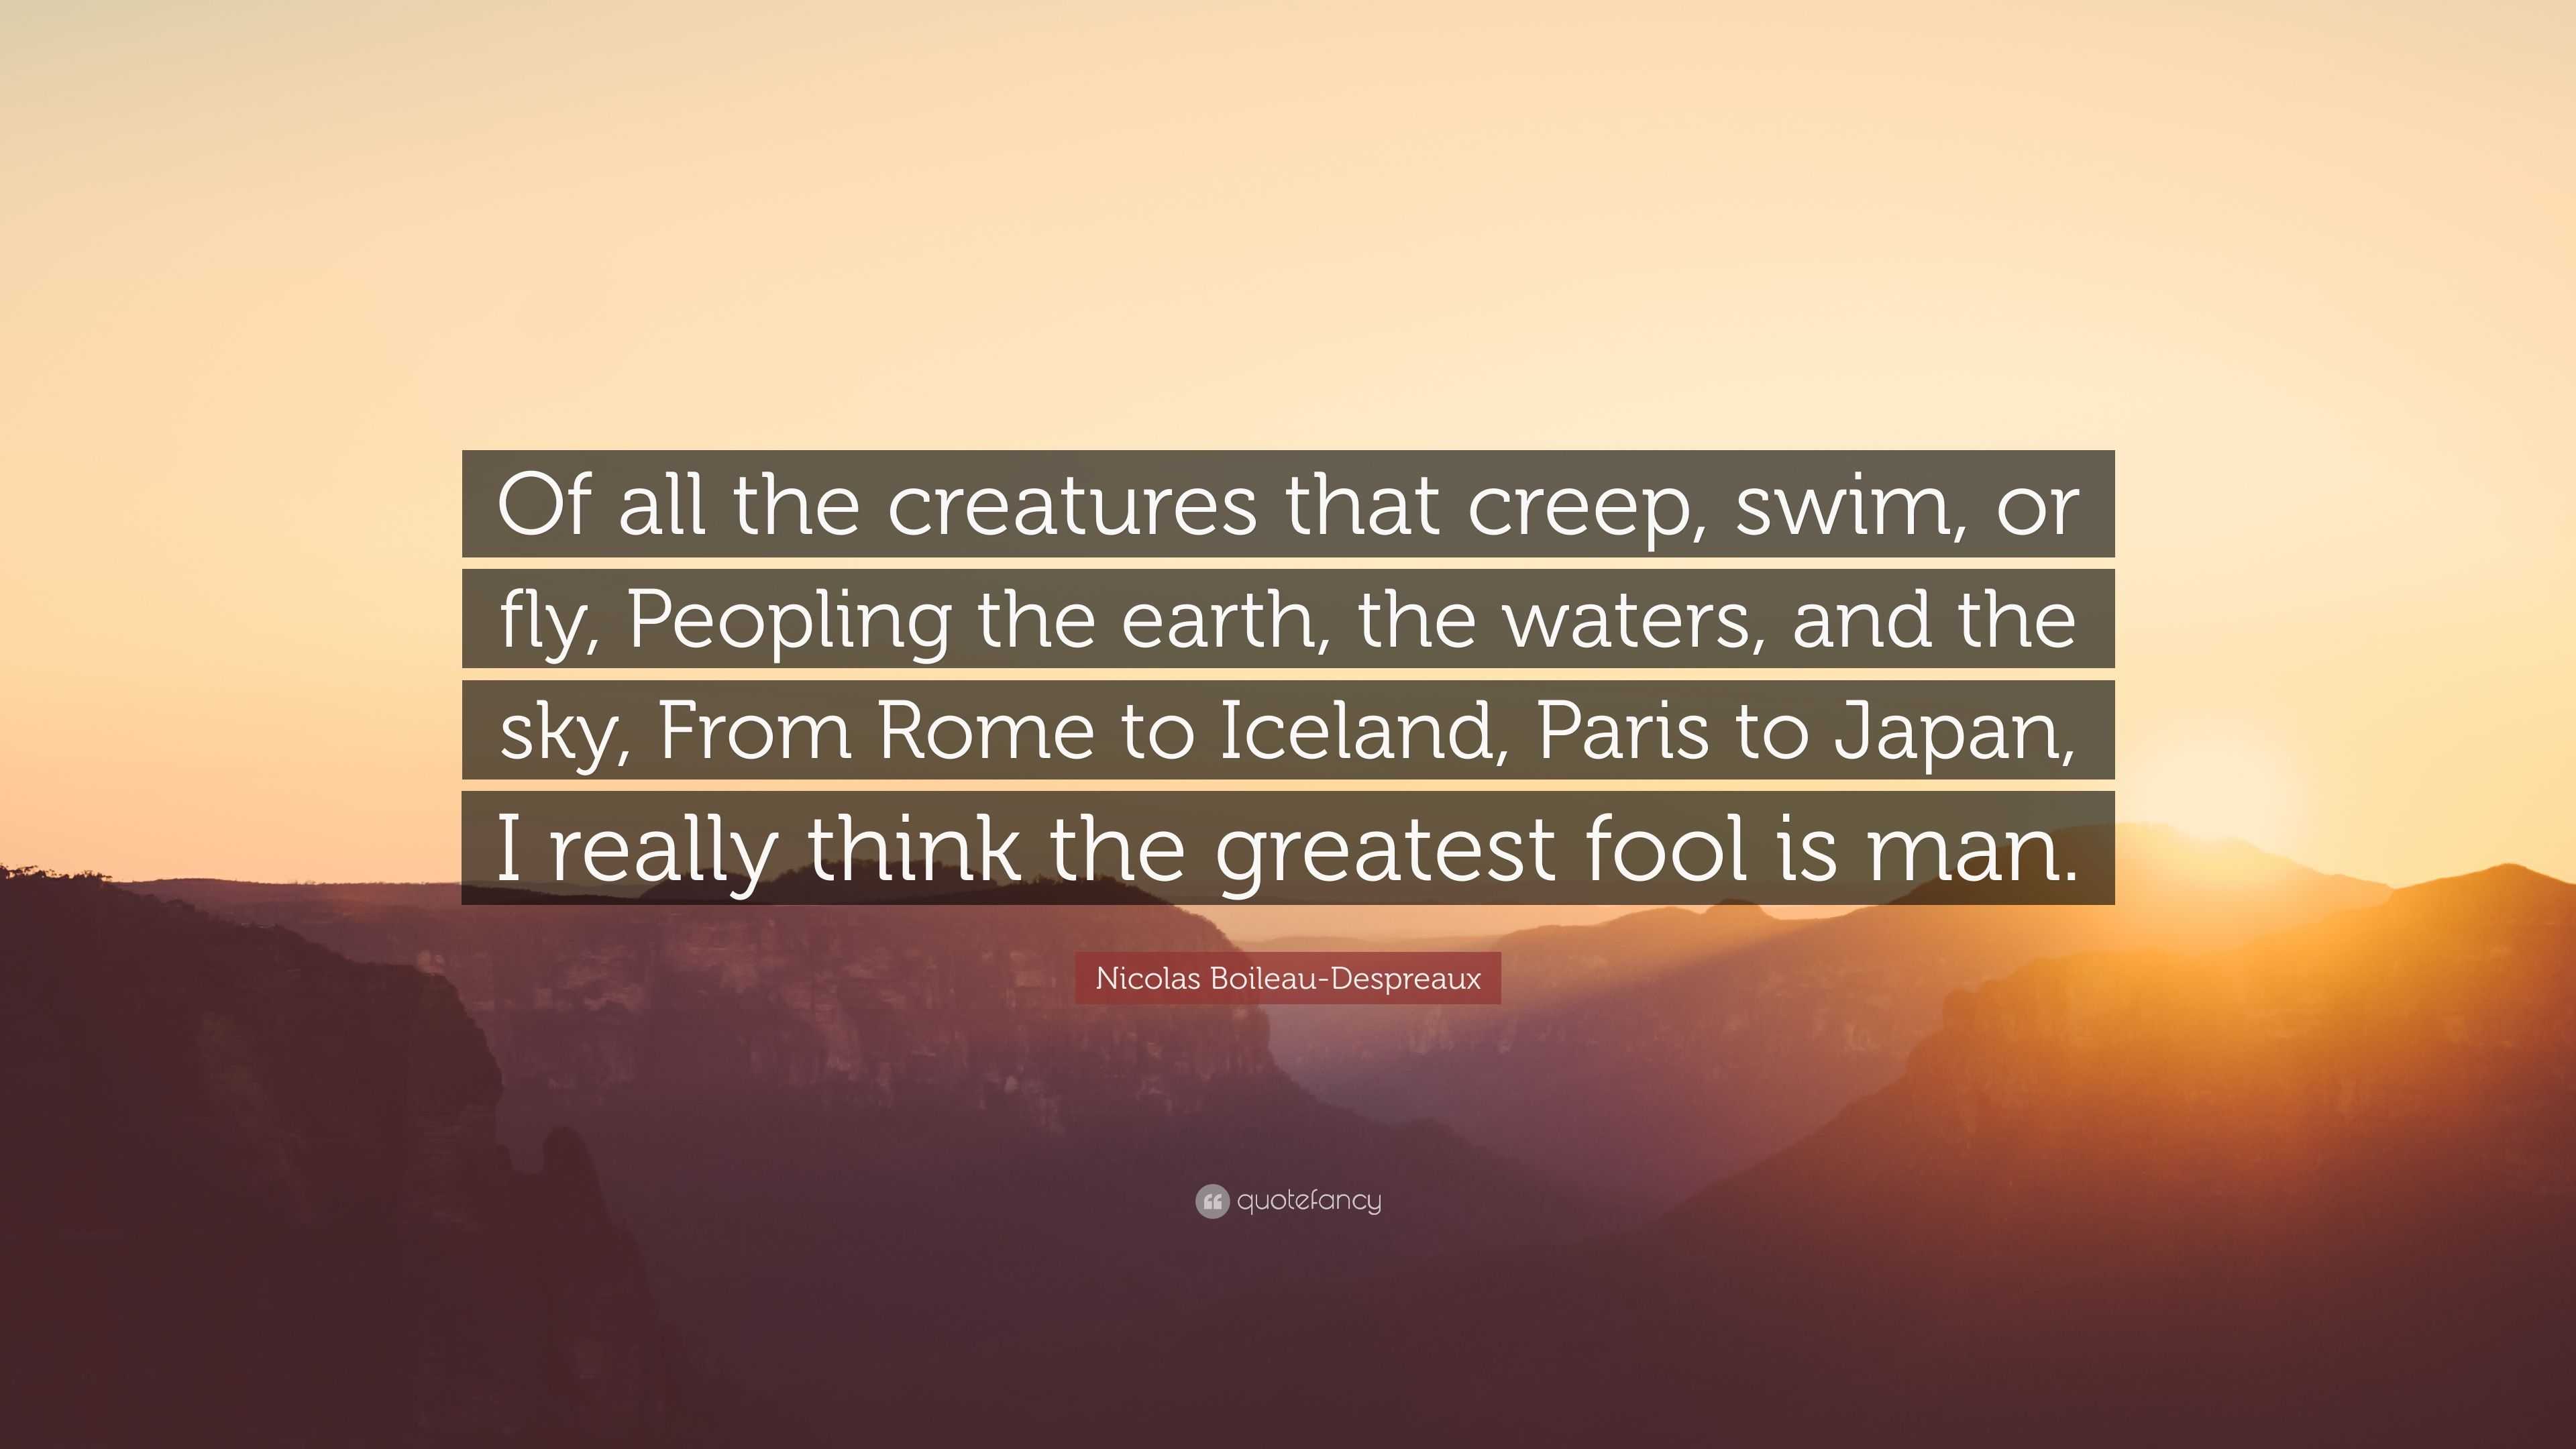 Nicolas Boileau Despreaux Quote Of All The Creatures That Creep Swim Or Fly Peopling The Earth The Waters And The Sky From Rome To Iceland Paris 7 Wallpapers Quotefancy